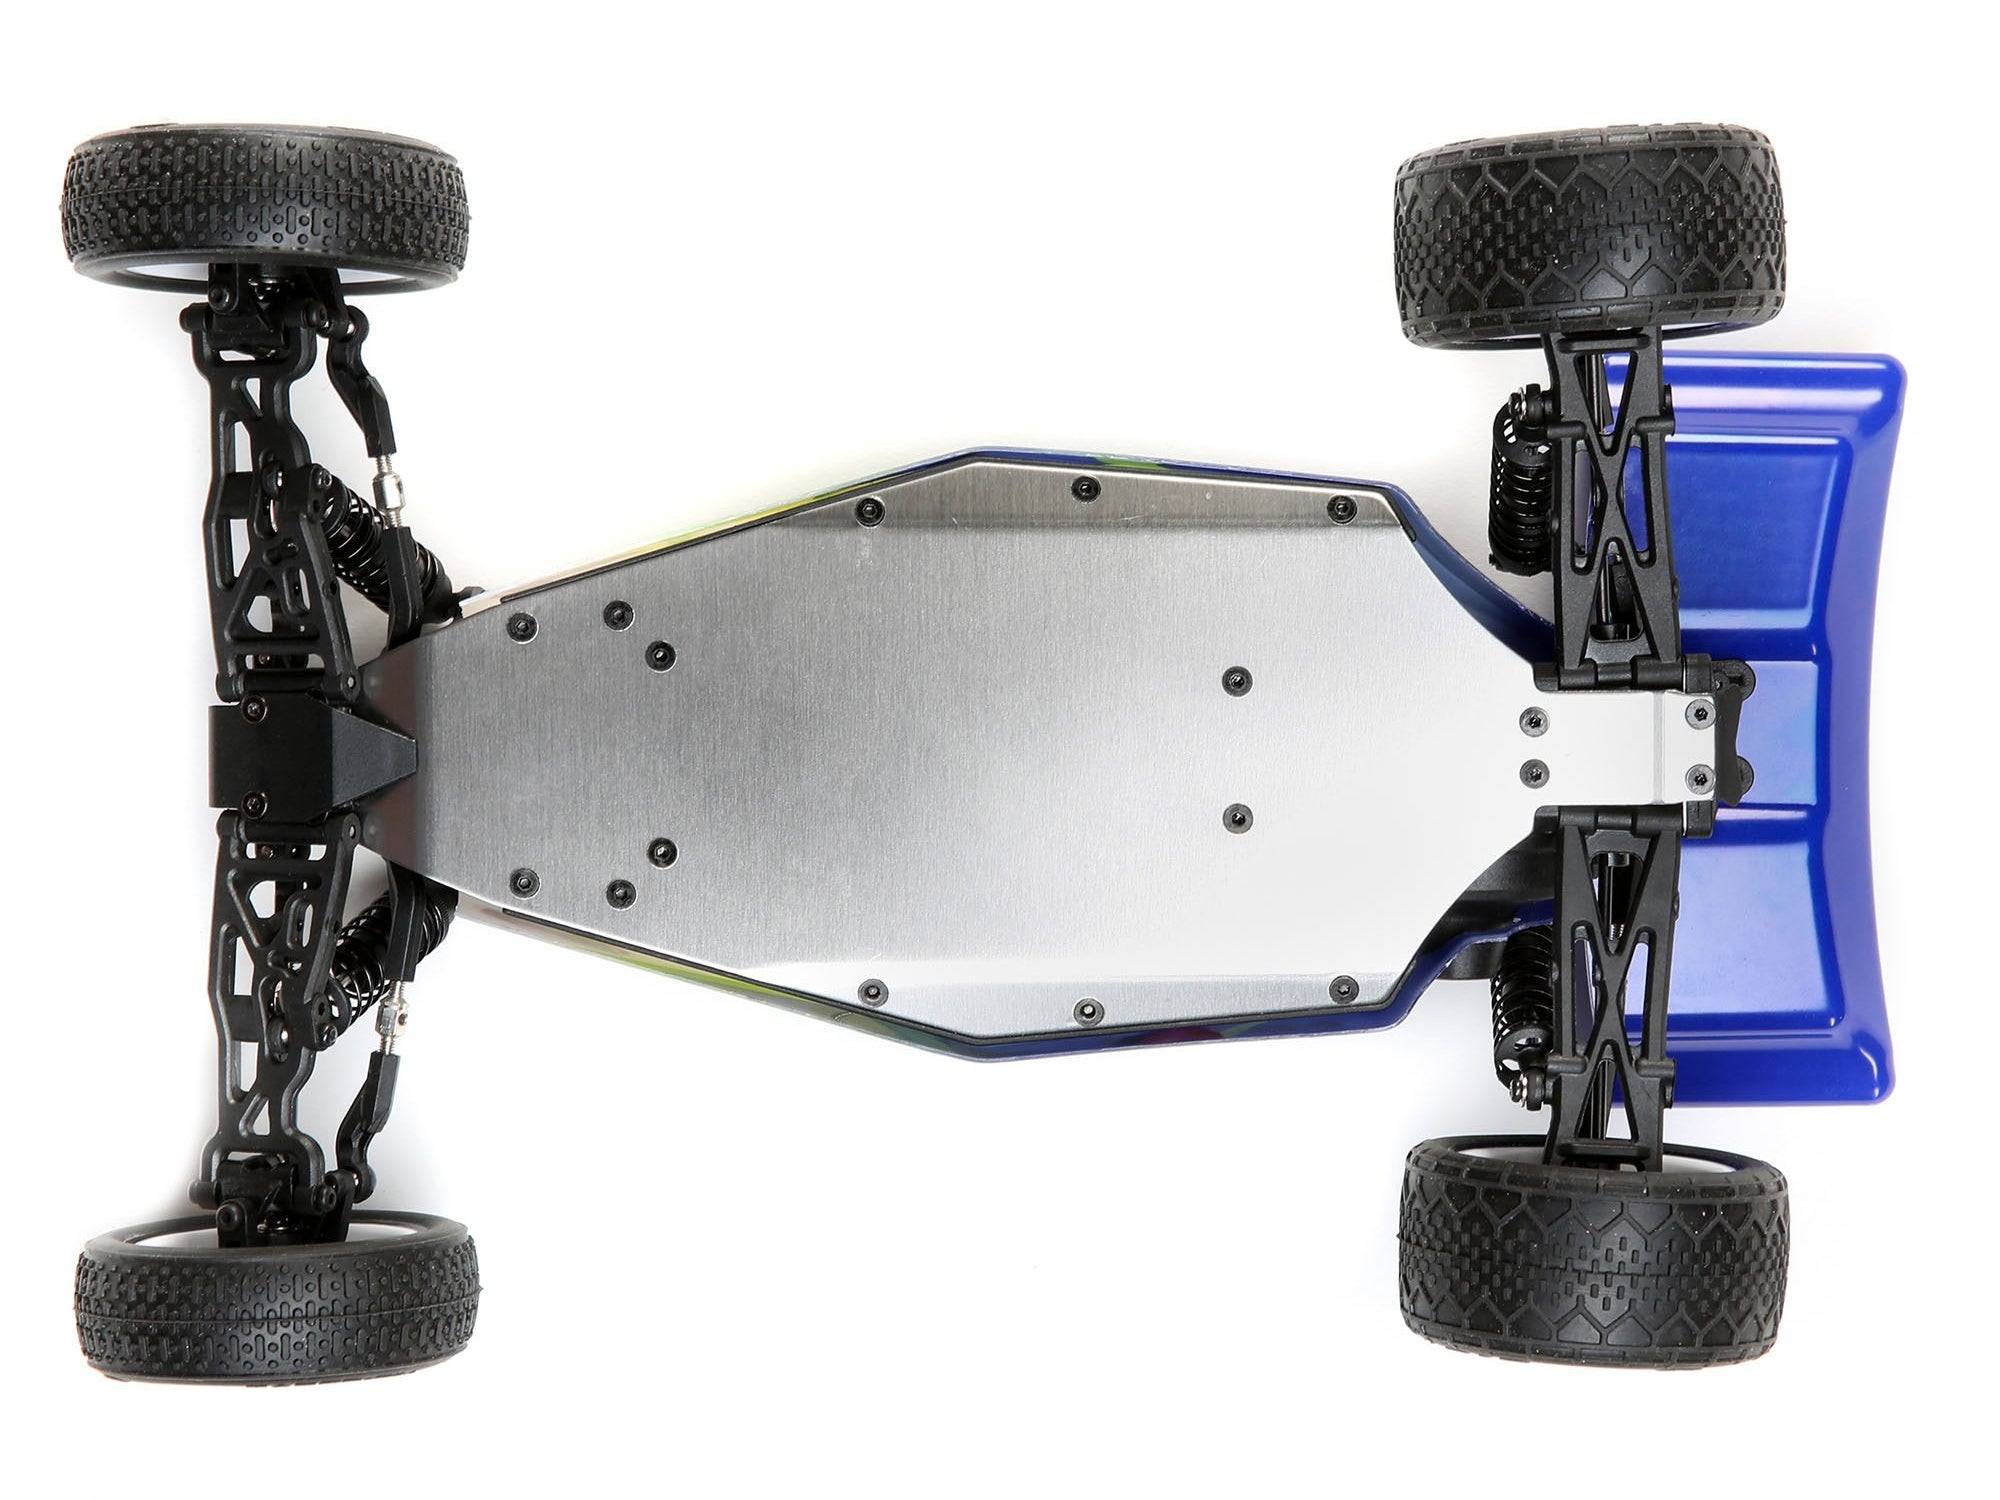 Losi 1/16 Mini-B Brushed RTR 2WD Buggy - Blue/White LOS01016T1